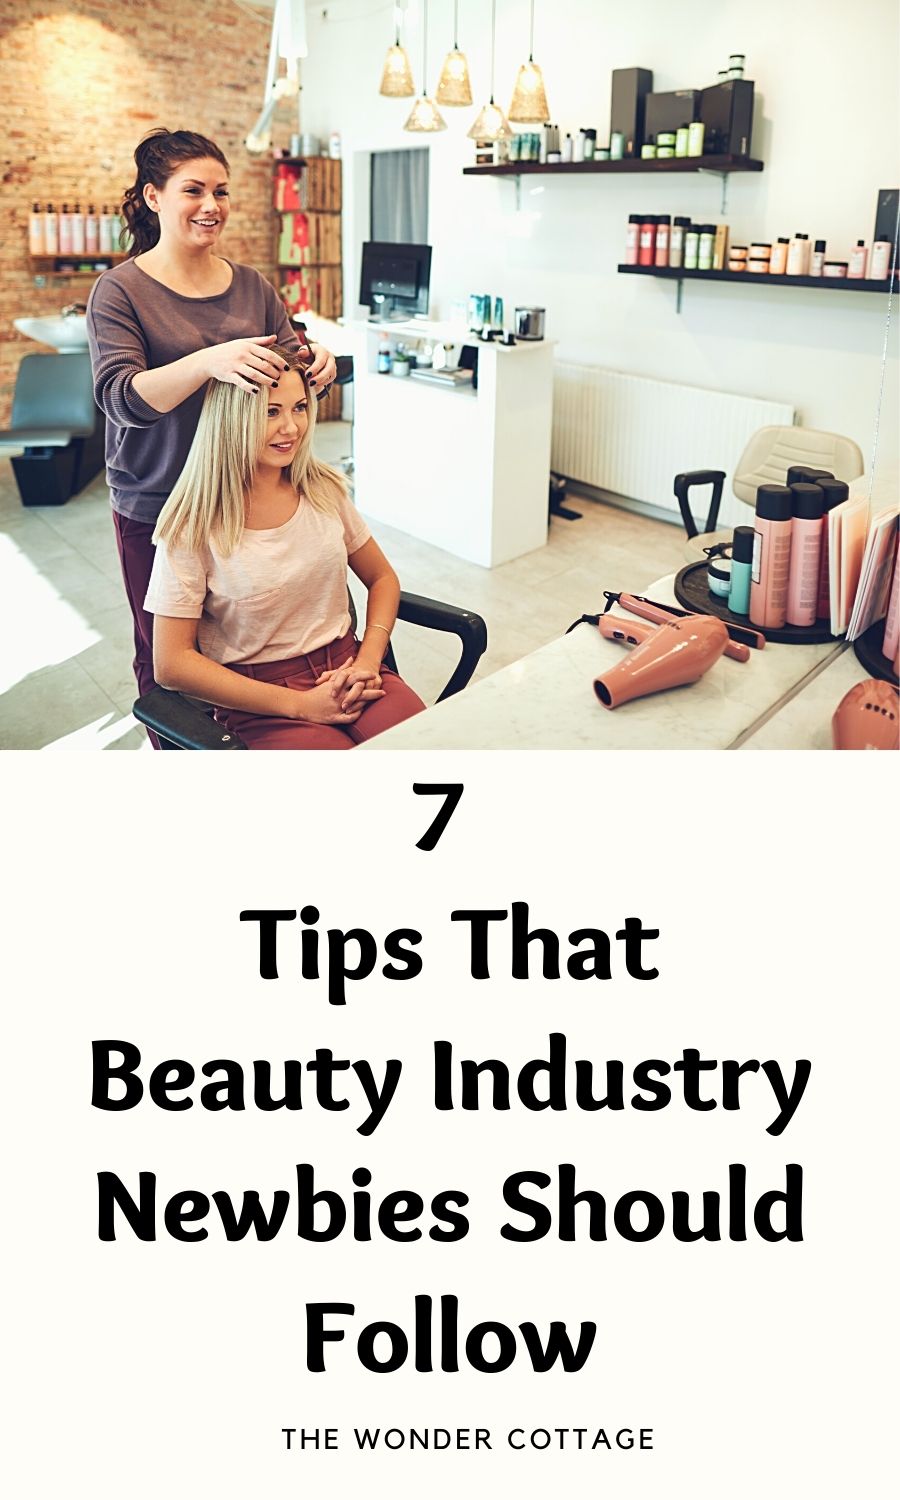 7 Tips That Beauty Industry Newbies Should Follow